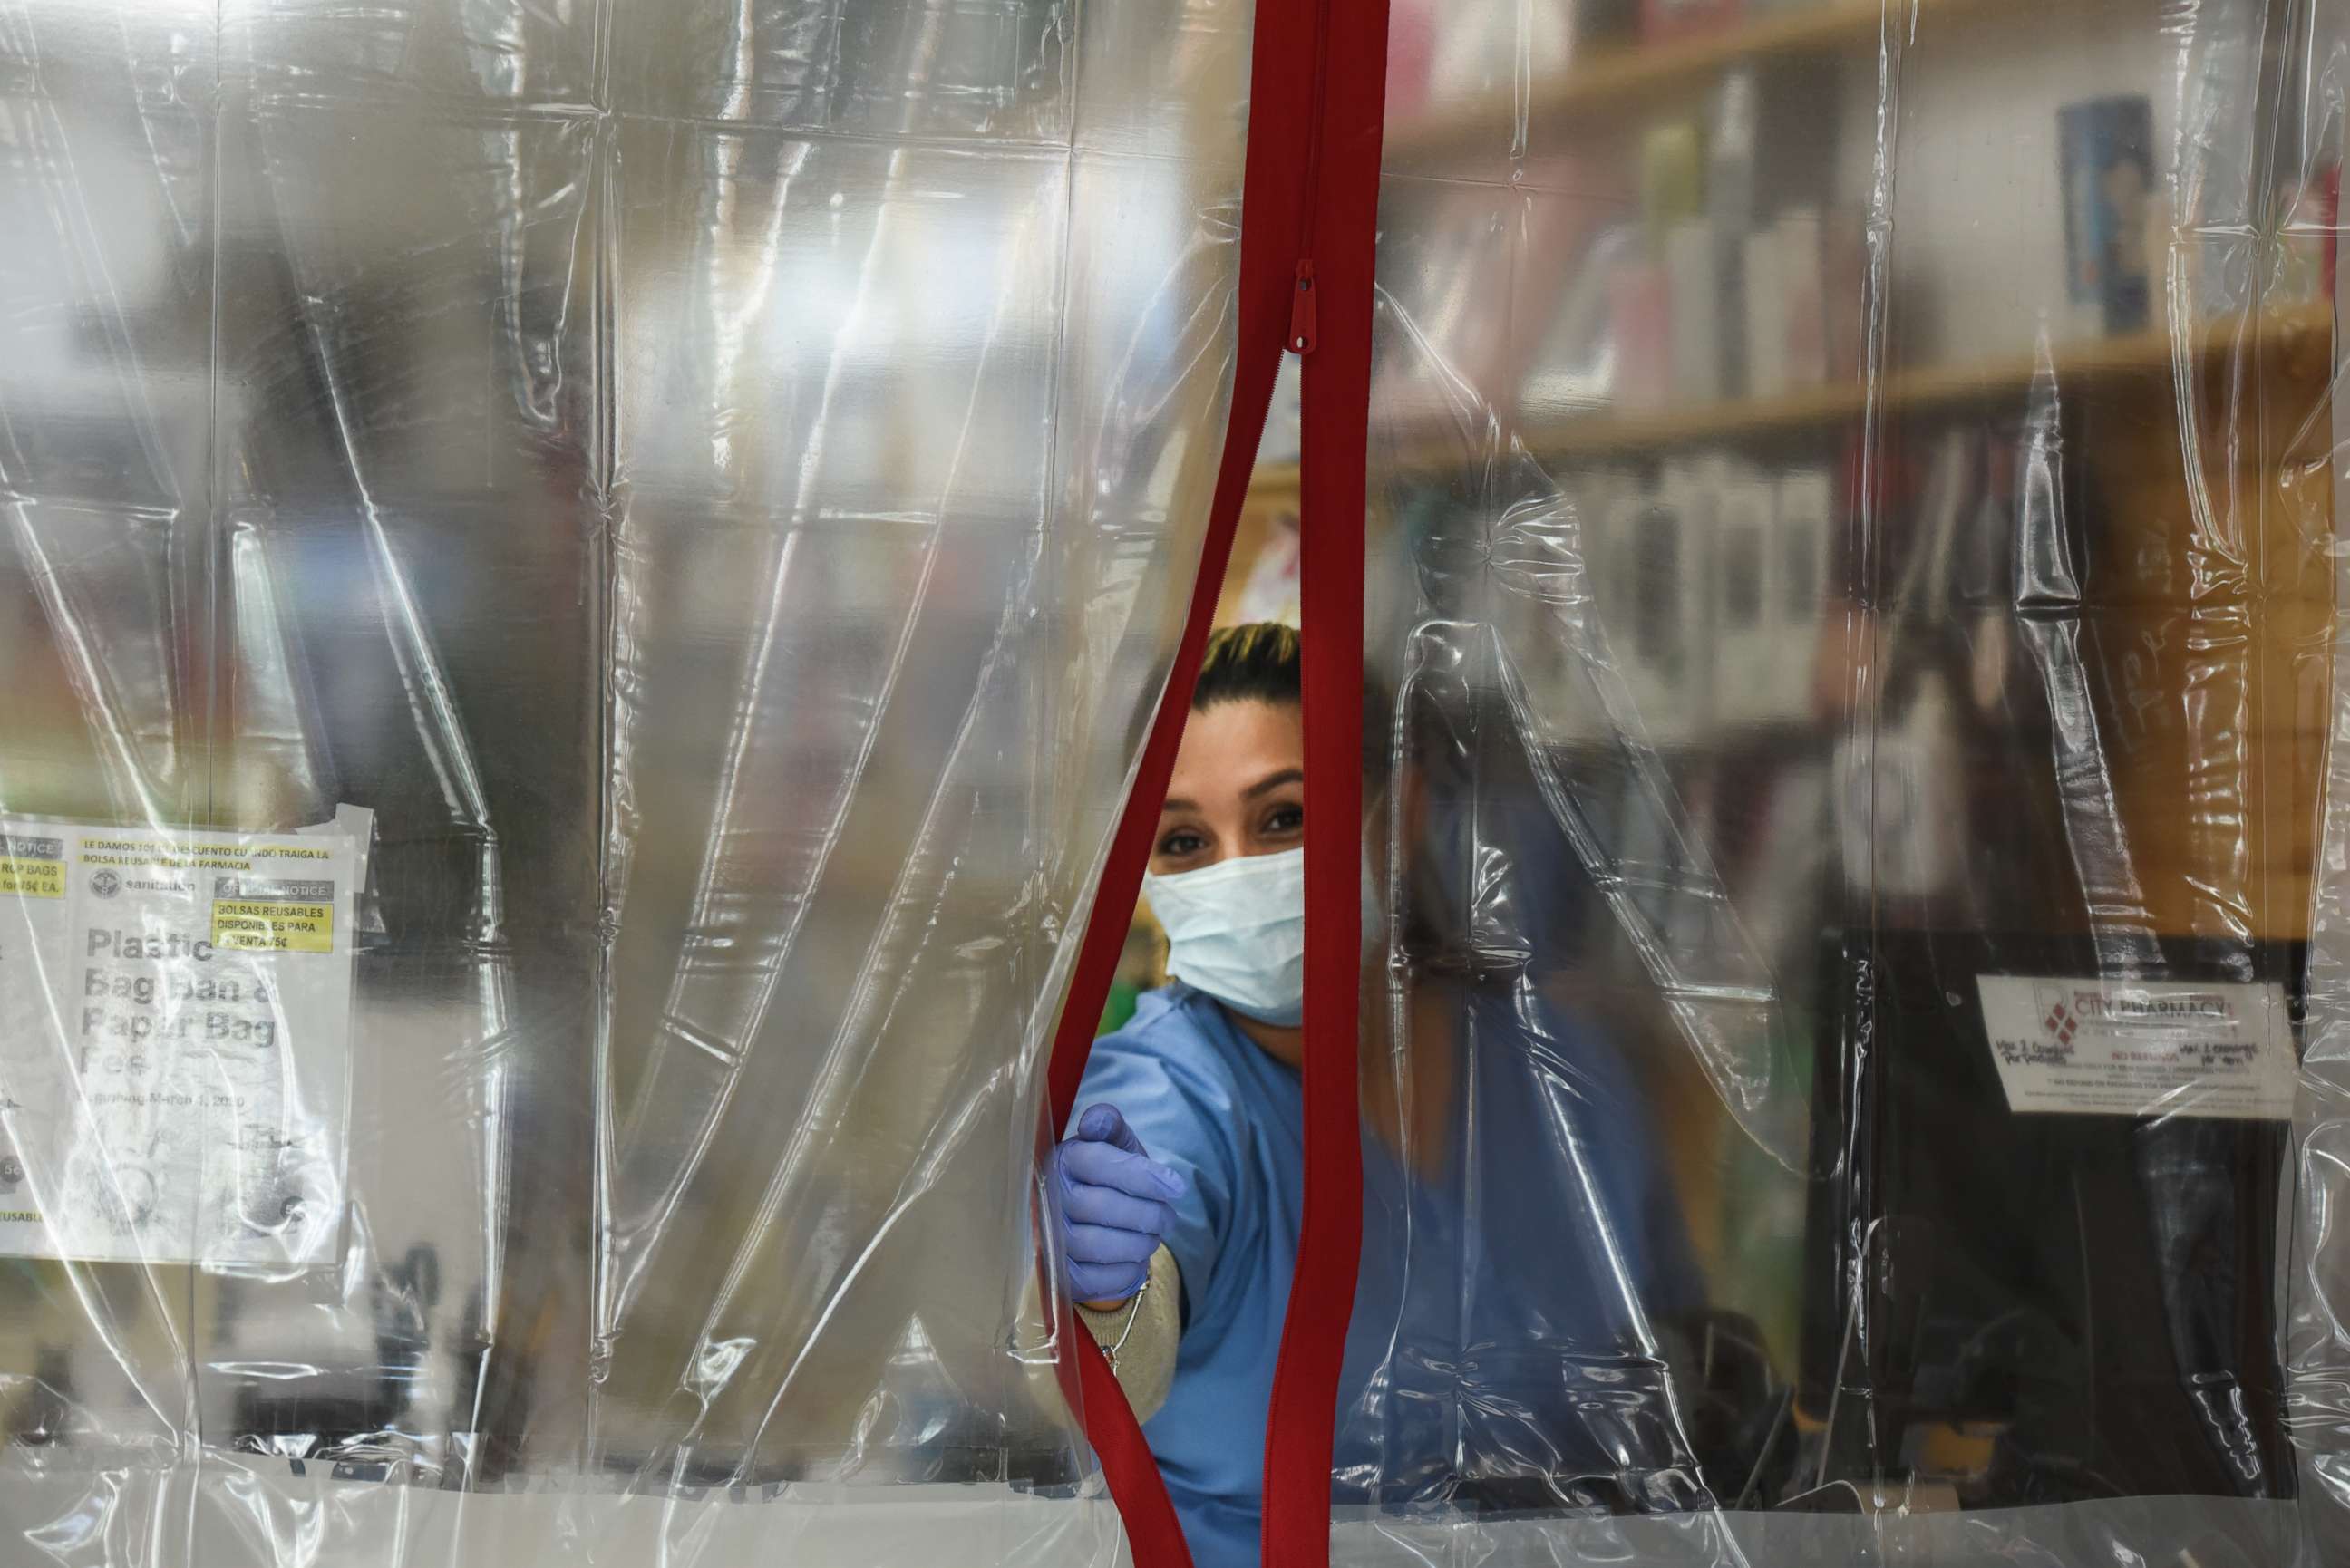 PHOTO: A pharmacist works behind plastic sheeting while wearing personal protective equipment in the Elmhurst neighborhood on April 1, 2020, in New York.